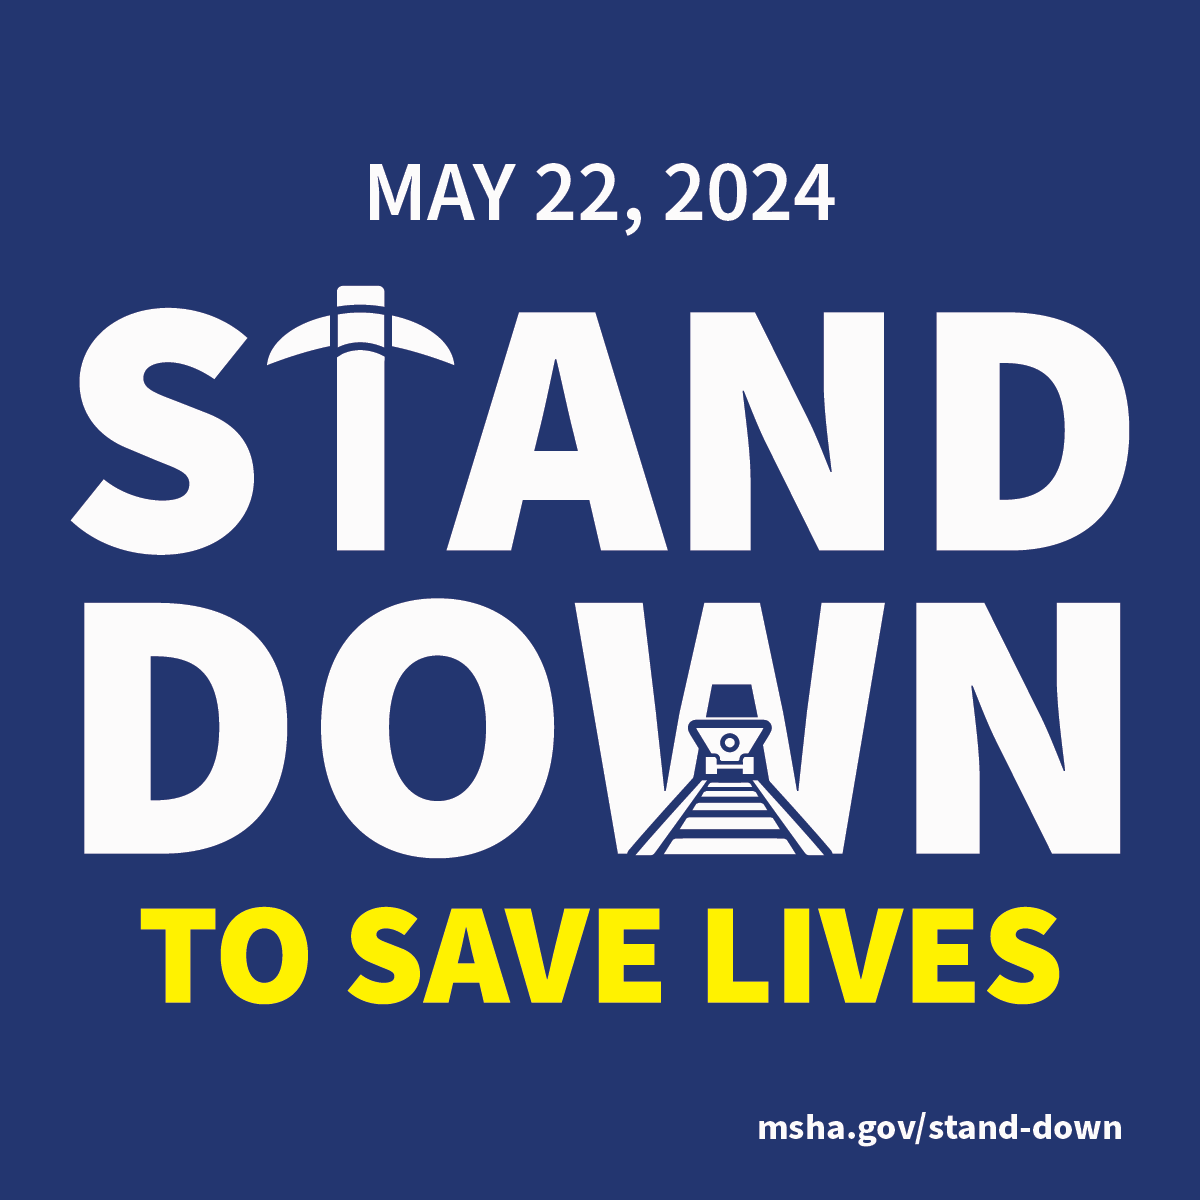 Today, we are standing down to save lives. We're taking extra time with all our employees to discuss important topics like identifying hazards, clear communication, and the Stop and Correct Authority each employee has when they see something unsafe.
#StandDownToSaveLives #Warrior